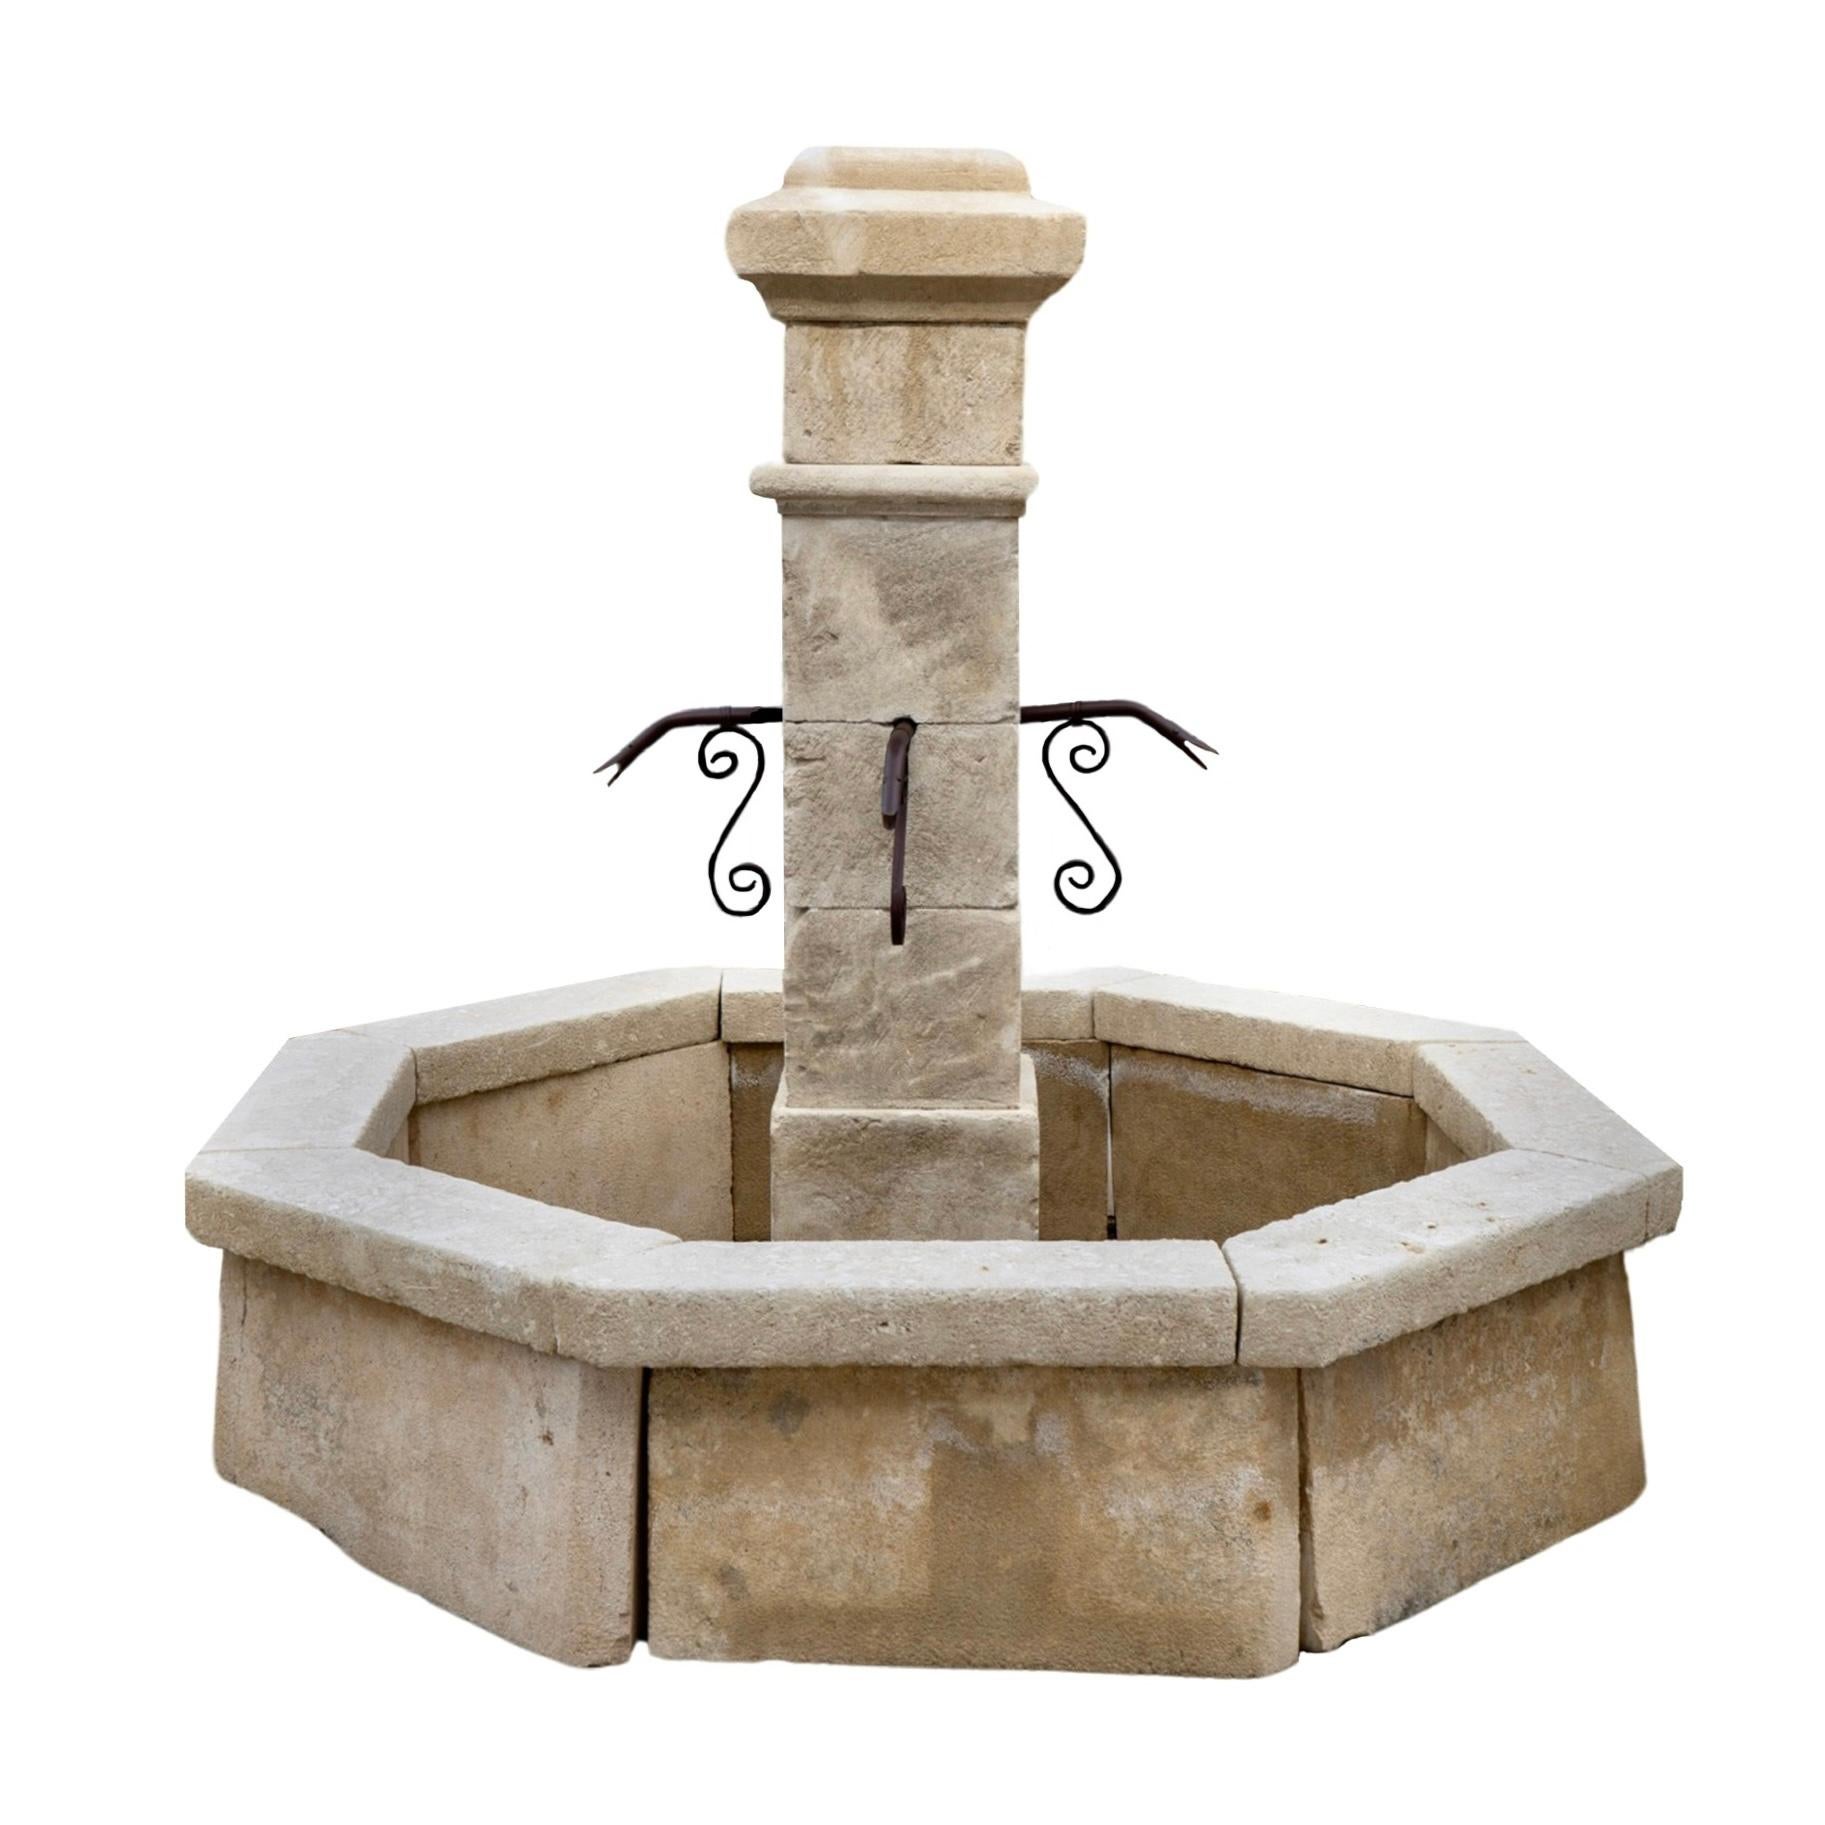 Experience the elegance and durability of our French Limestone Central Fountain. Made in the 1890s, this central style fountain is constructed with high-quality limestone, ensuring longevity and timeless beauty. With three spout holes for efficient